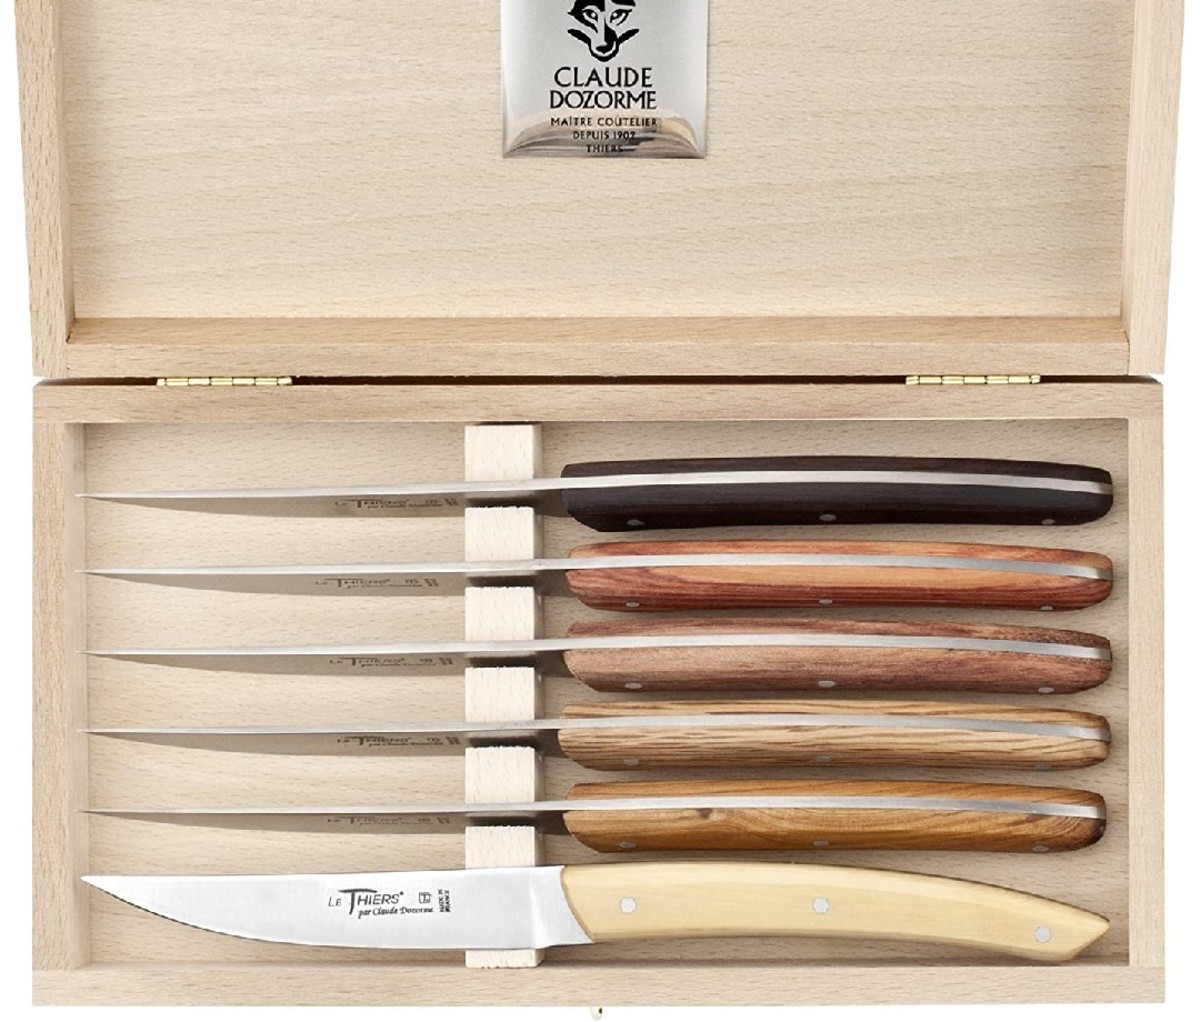 A box with the Claude Dozorme Thiers Mixed Wood Handle Stainless Steel Steak Knife Set.